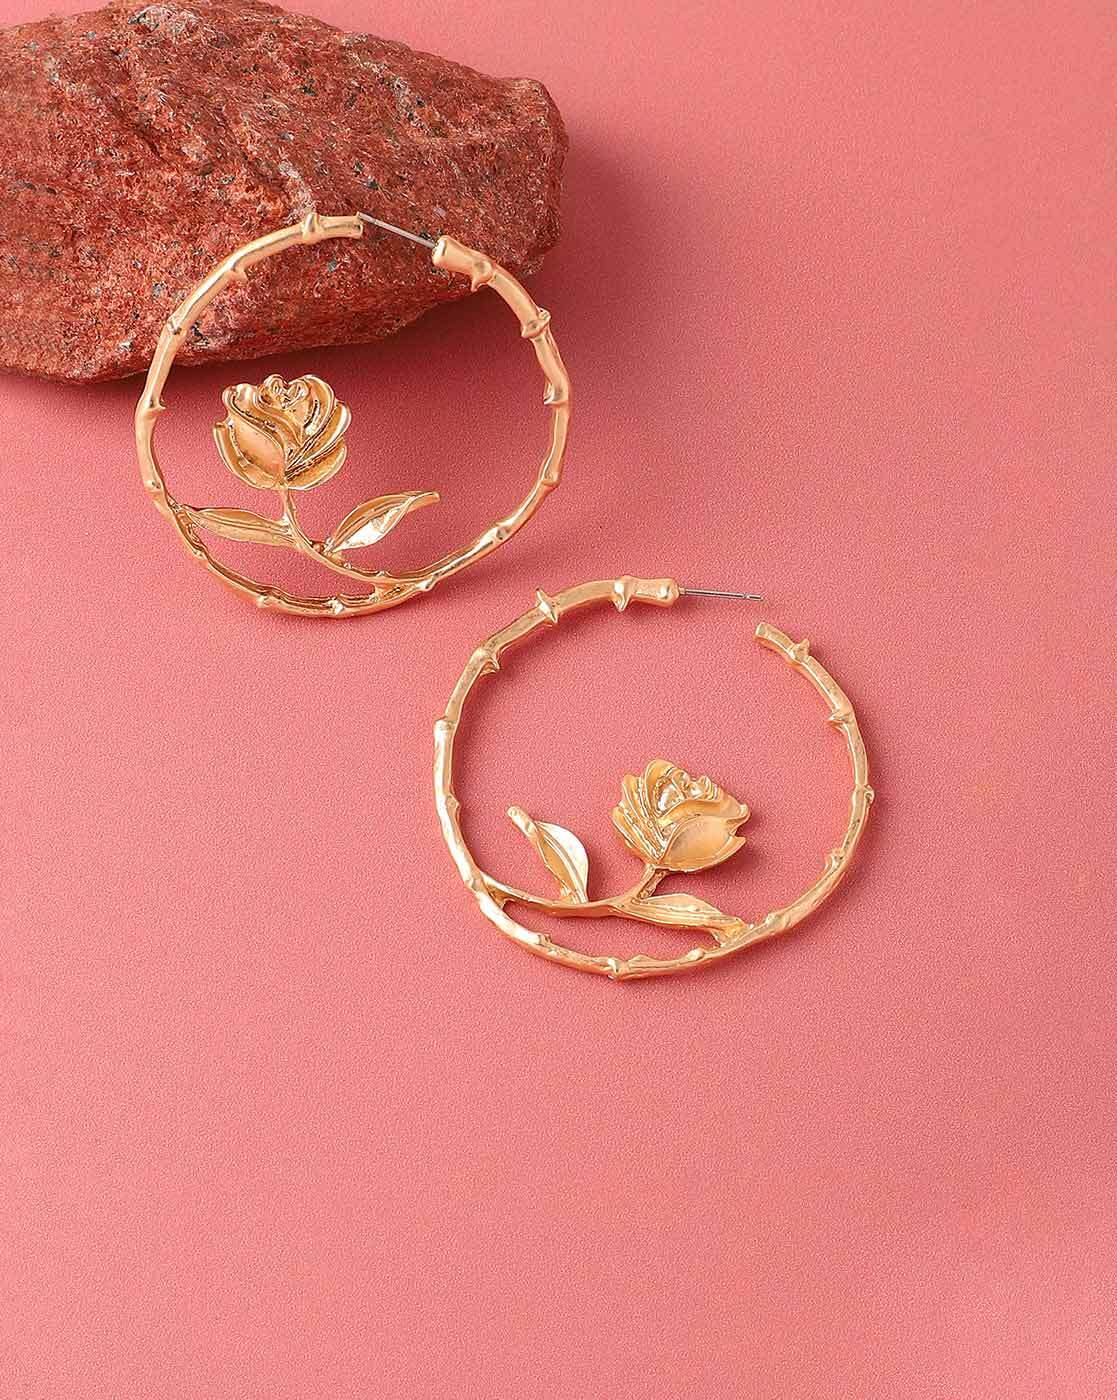 OOMPH Jewellery Rose Gold Tone Large Crystal Studded Party Hoop Earrings  For Women  Girls Buy OOMPH Jewellery Rose Gold Tone Large Crystal Studded  Party Hoop Earrings For Women  Girls Online